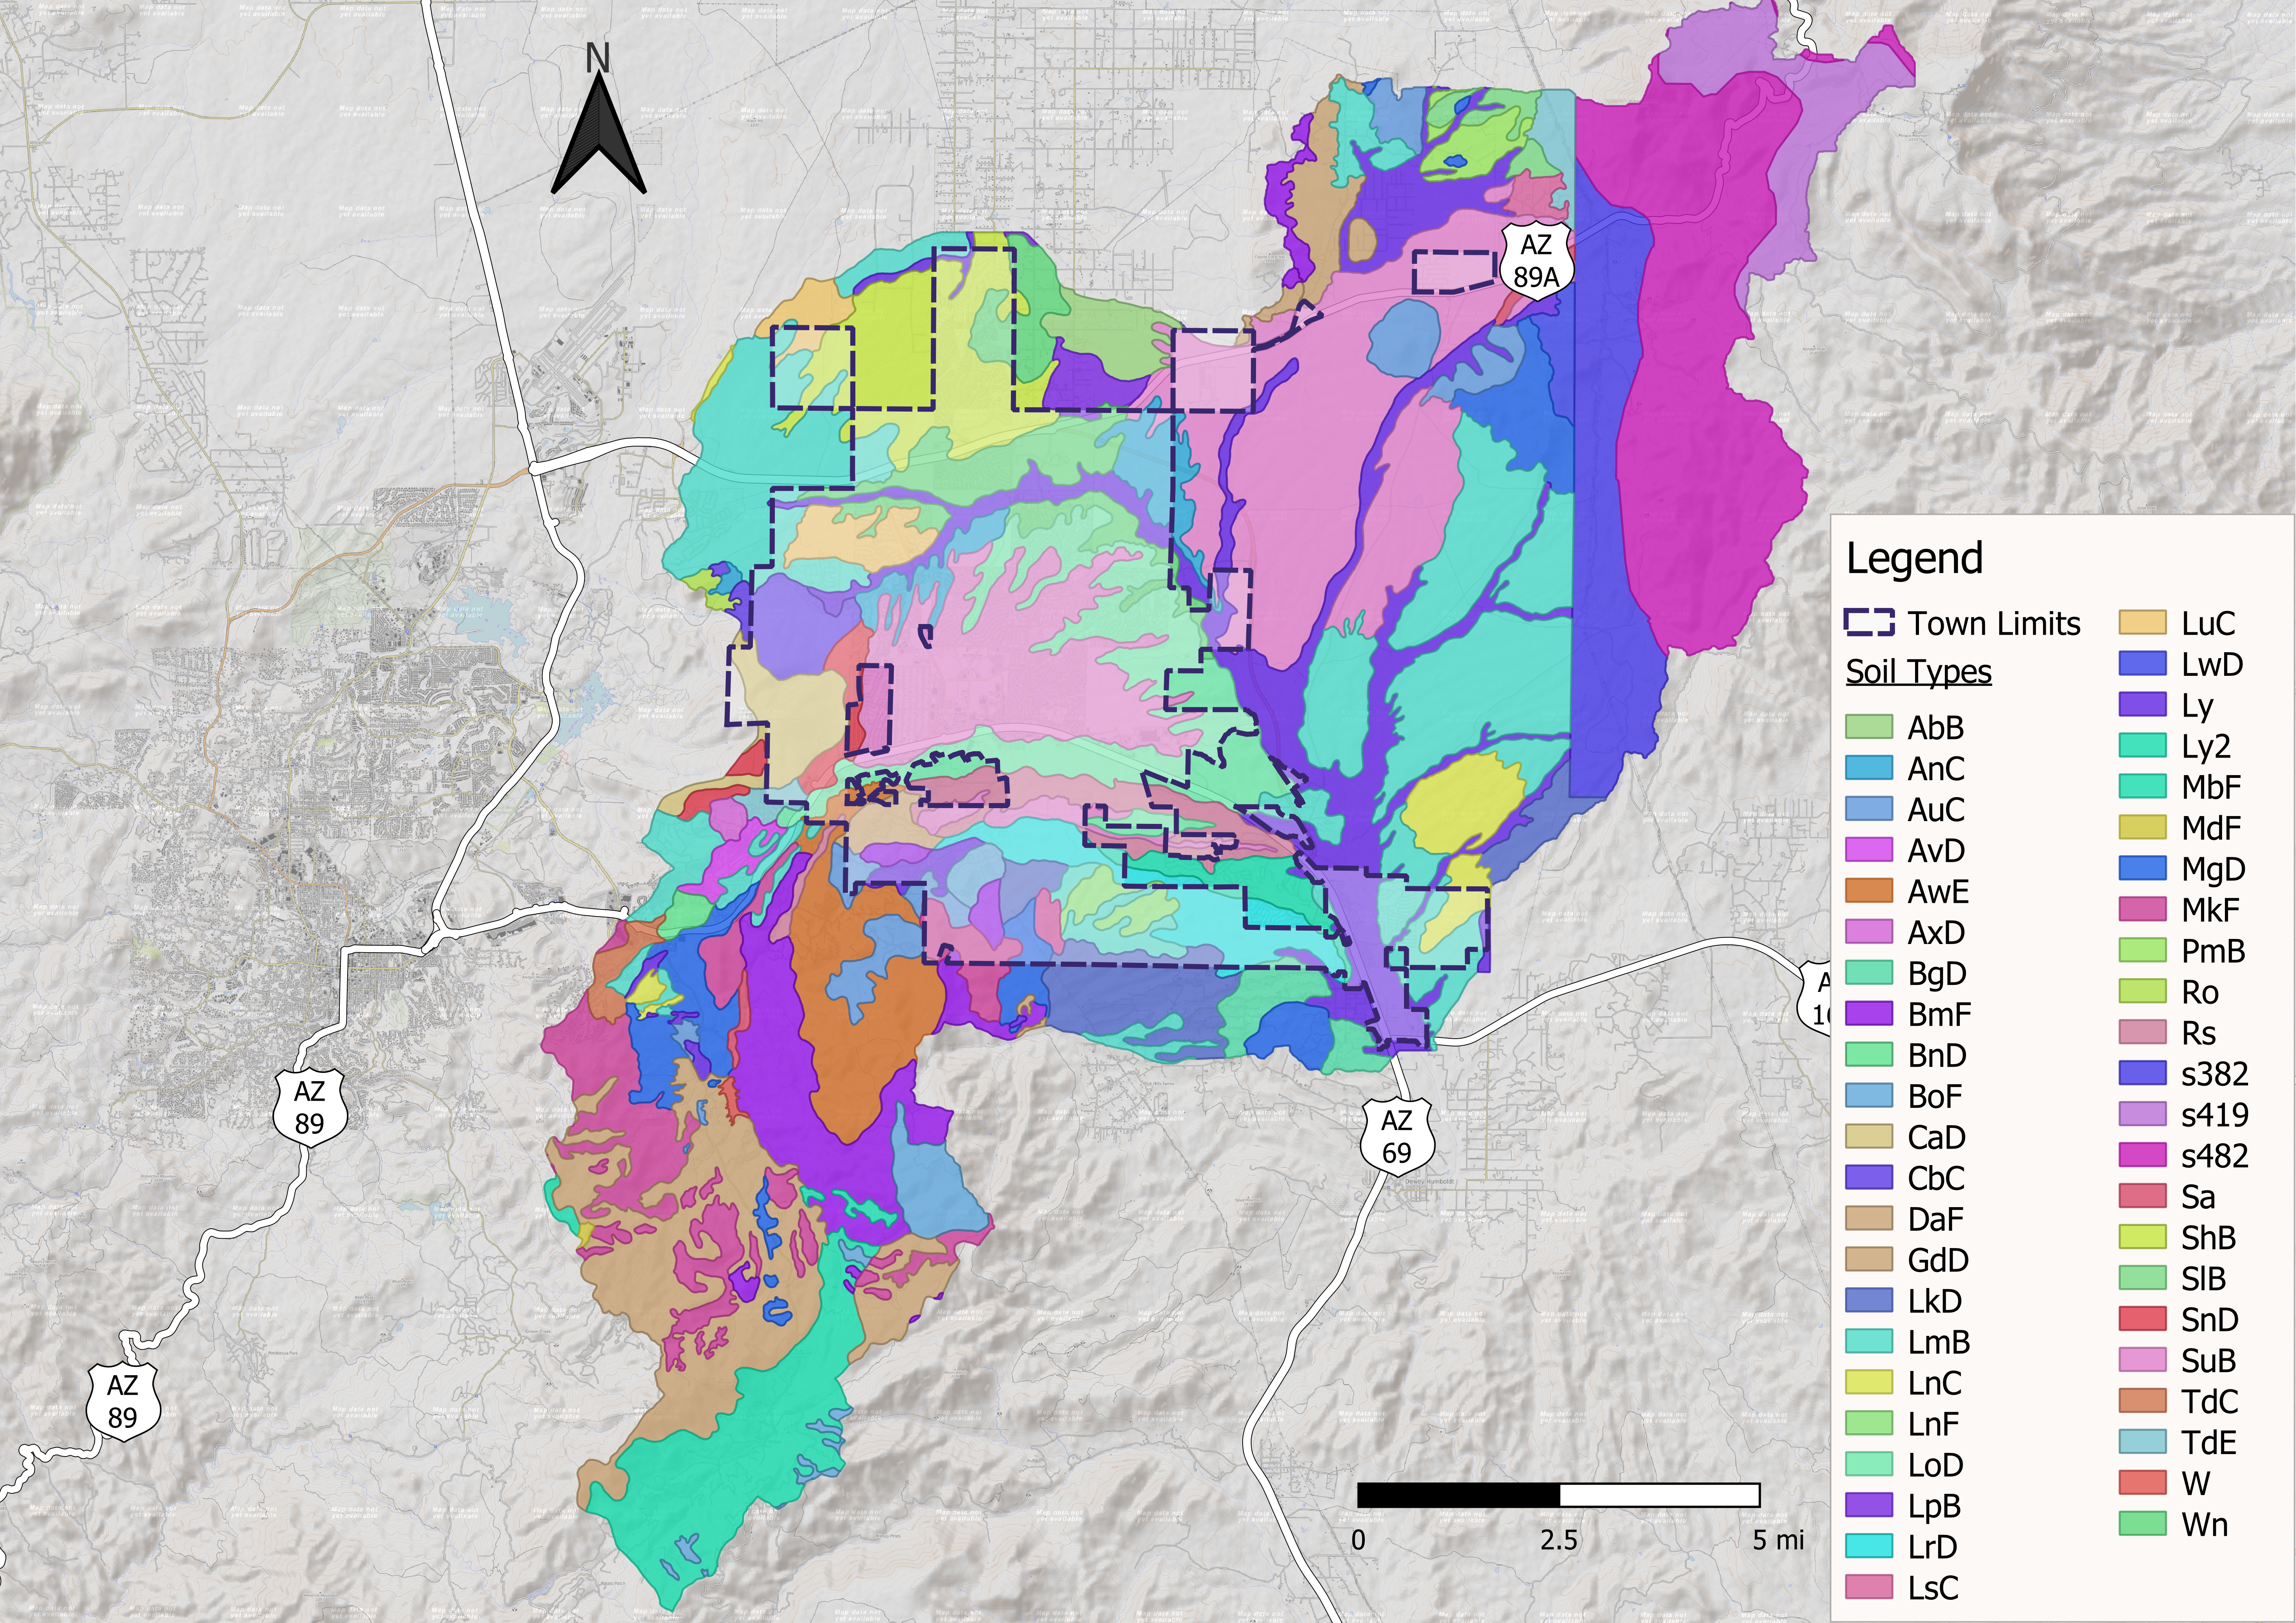 45 unique soil map units from which Green and Ampt parameter values are calculated and used in the hydrologic modeling of the Town of Prescott Valley study area for this stormwater recharge project